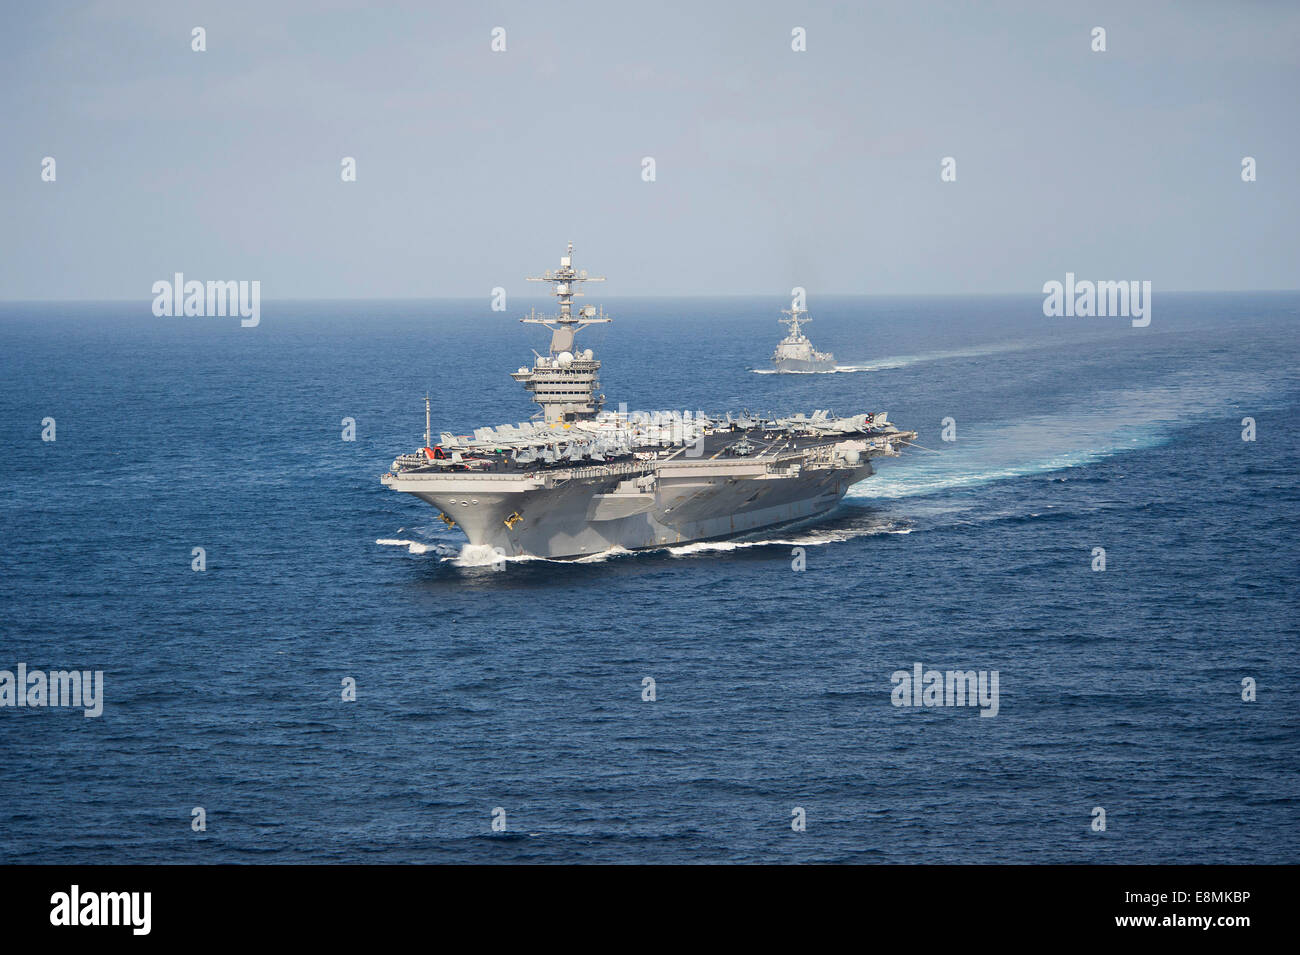 Pacific Ocean, May 23, 2014 - The aircraft carrier USS Carl Vinson (CVN 70) participates in a straits transit exercise with the Stock Photo